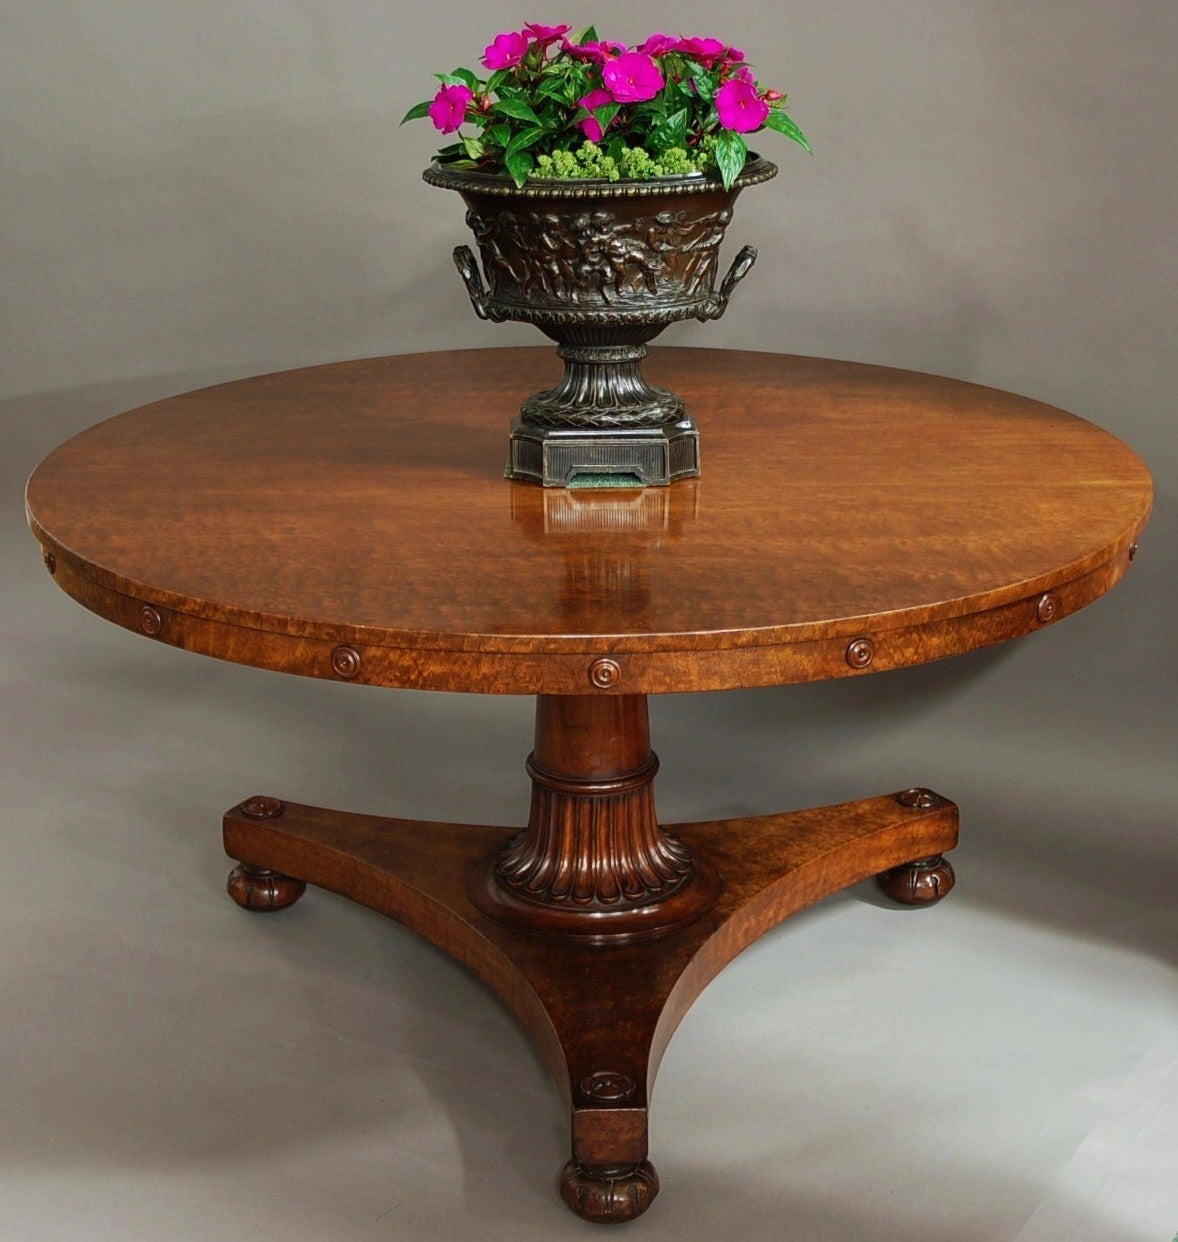 An early to mid-19th century 'plum pudding' mahogany tilt-top table of superb patina and figuring and of large proportions in the style of P & MA Nicholson (1765-1844 and 1796-1842).

This table consist of a superbly figured 'plum pudding'